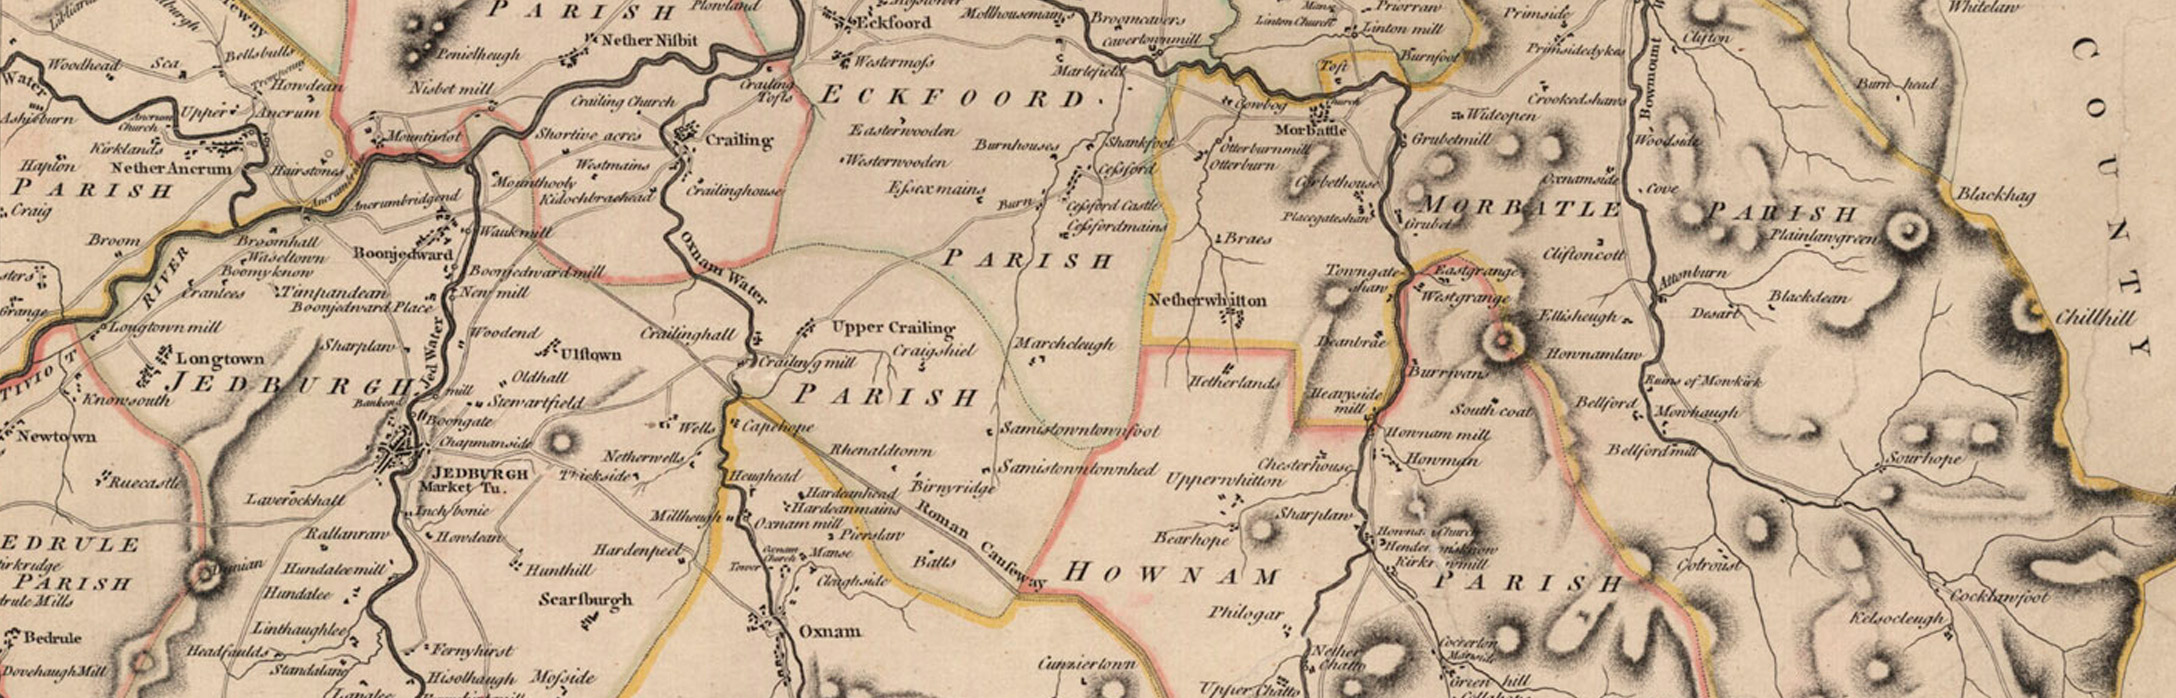 Detail of a map of Roxburghshire or Tiviotdale by Matthew Stobie, 1770